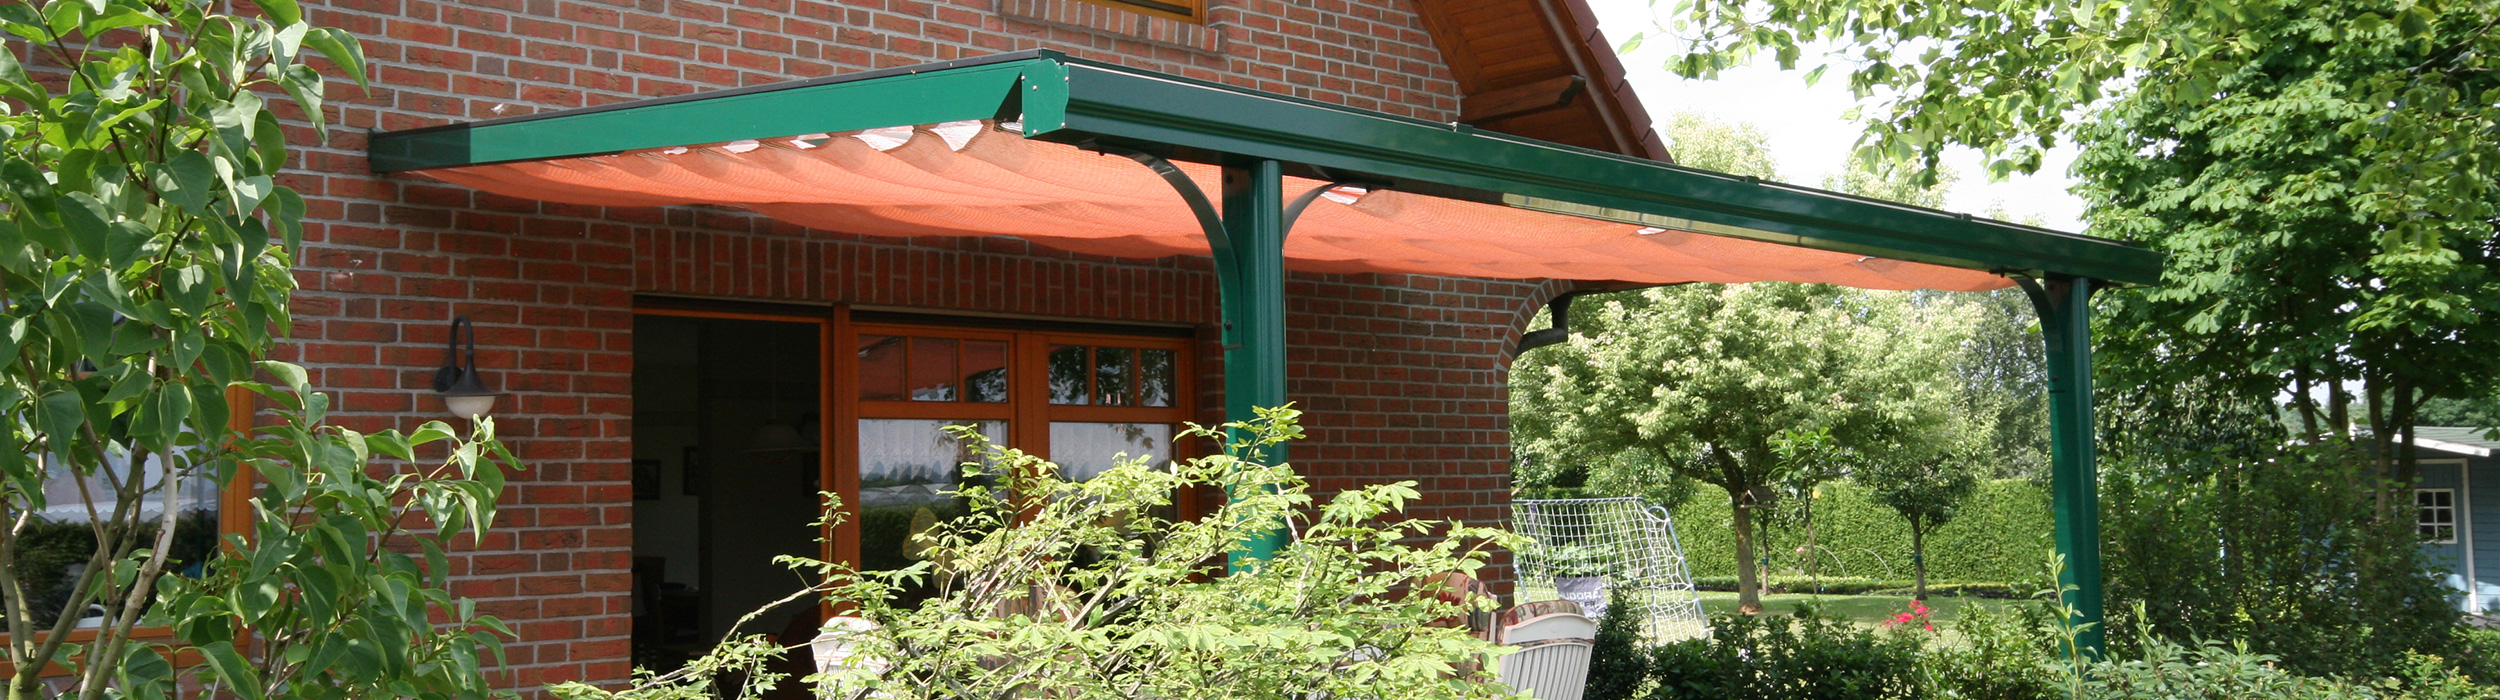 Patio roofing in fir green and with sunshade.